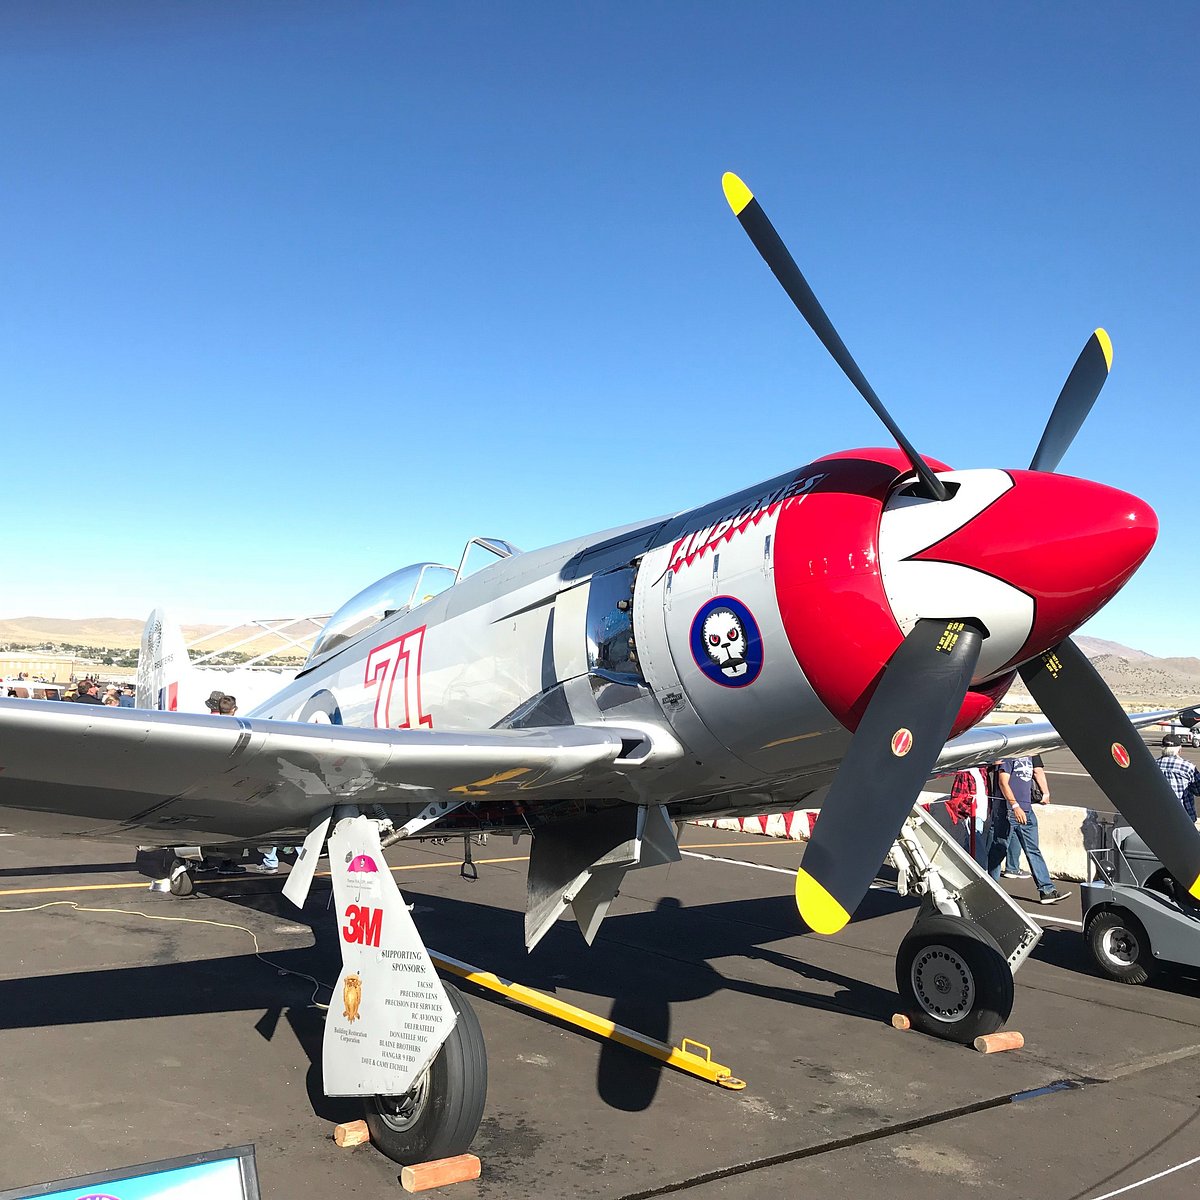 Reno Air Racing Association All You Need to Know BEFORE You Go